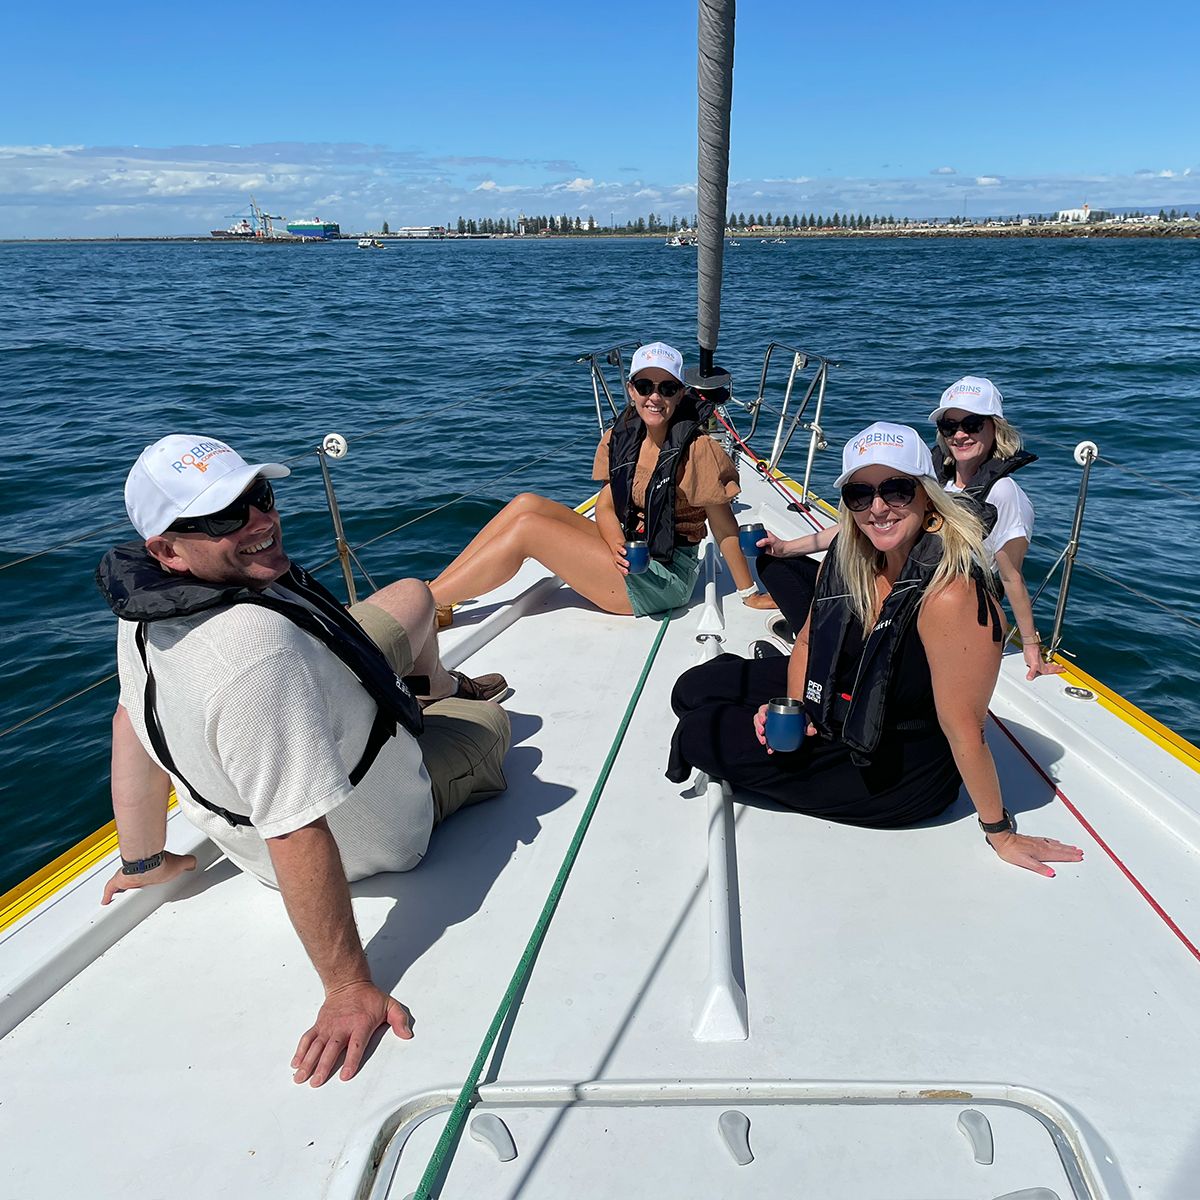 Private Charter - Blue water Sailing Adventure